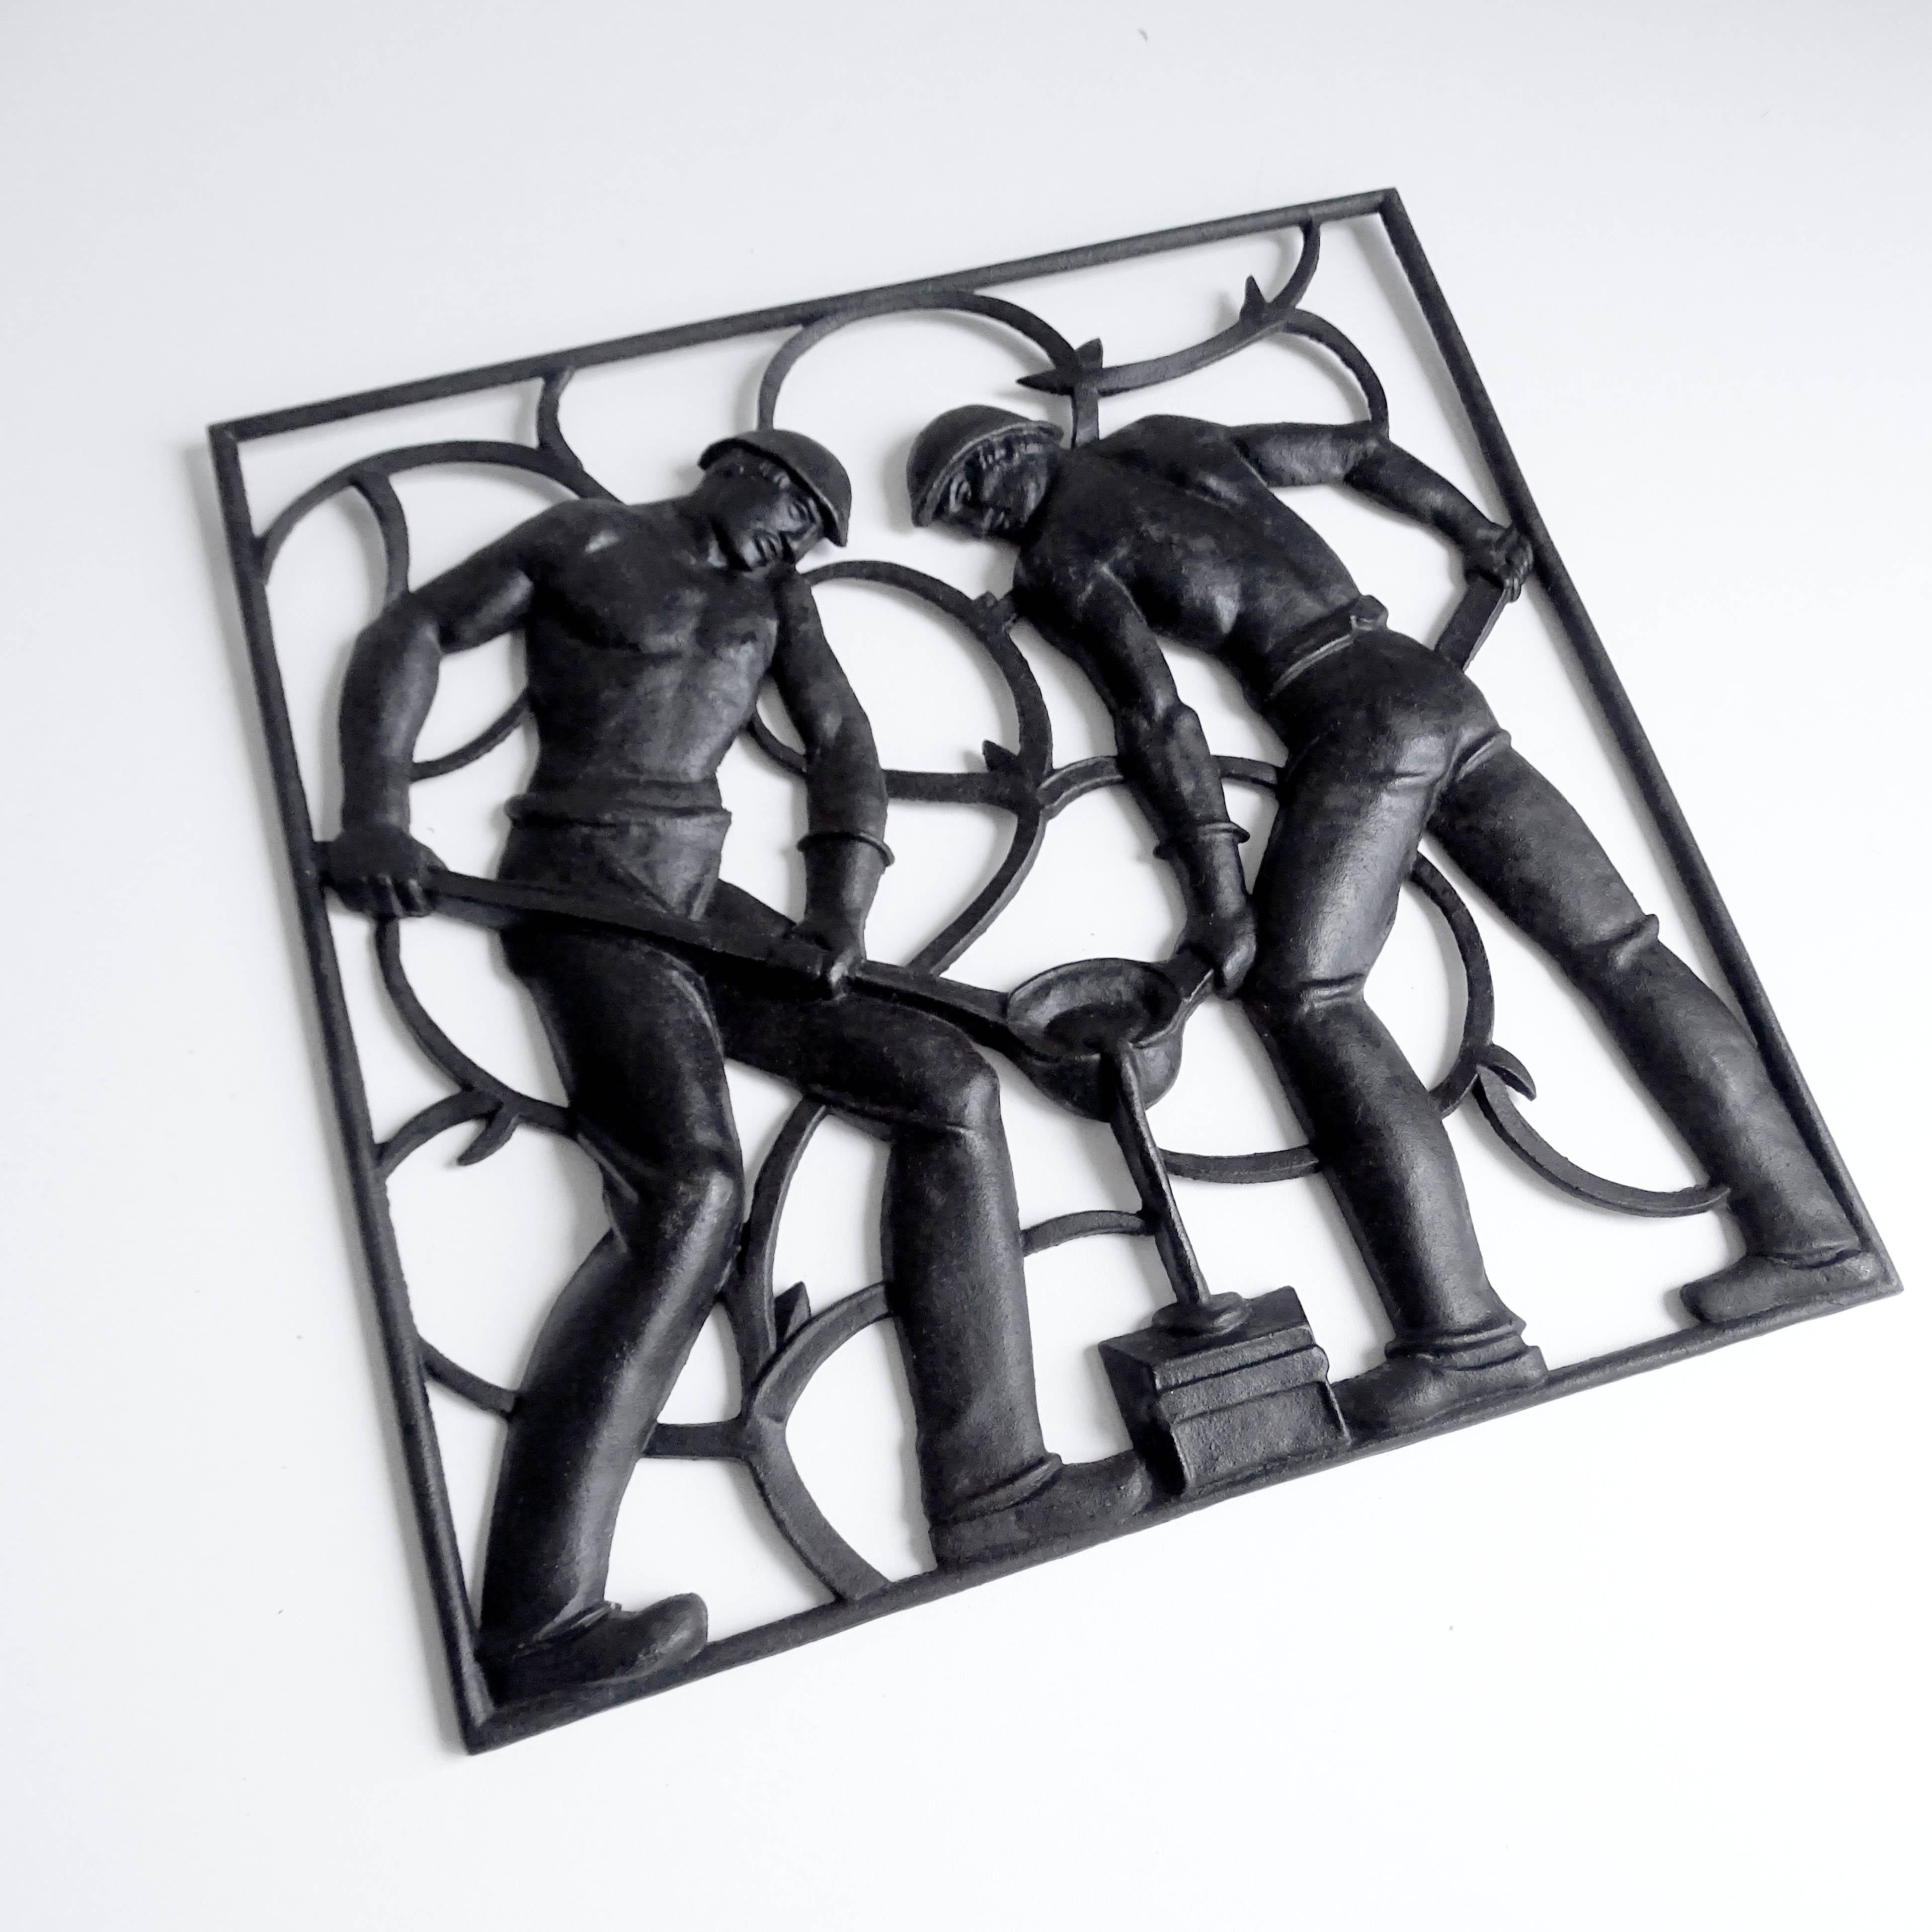 Very rare original Art Deco era wall sculpture / panel manufactured, circa 1925-1930, featuring two forge workers pouring iron. Notice the plasticity of the details which makes this striking piece so remarkable.
Dimensions
H 11.82 in. x W 11.82 in.